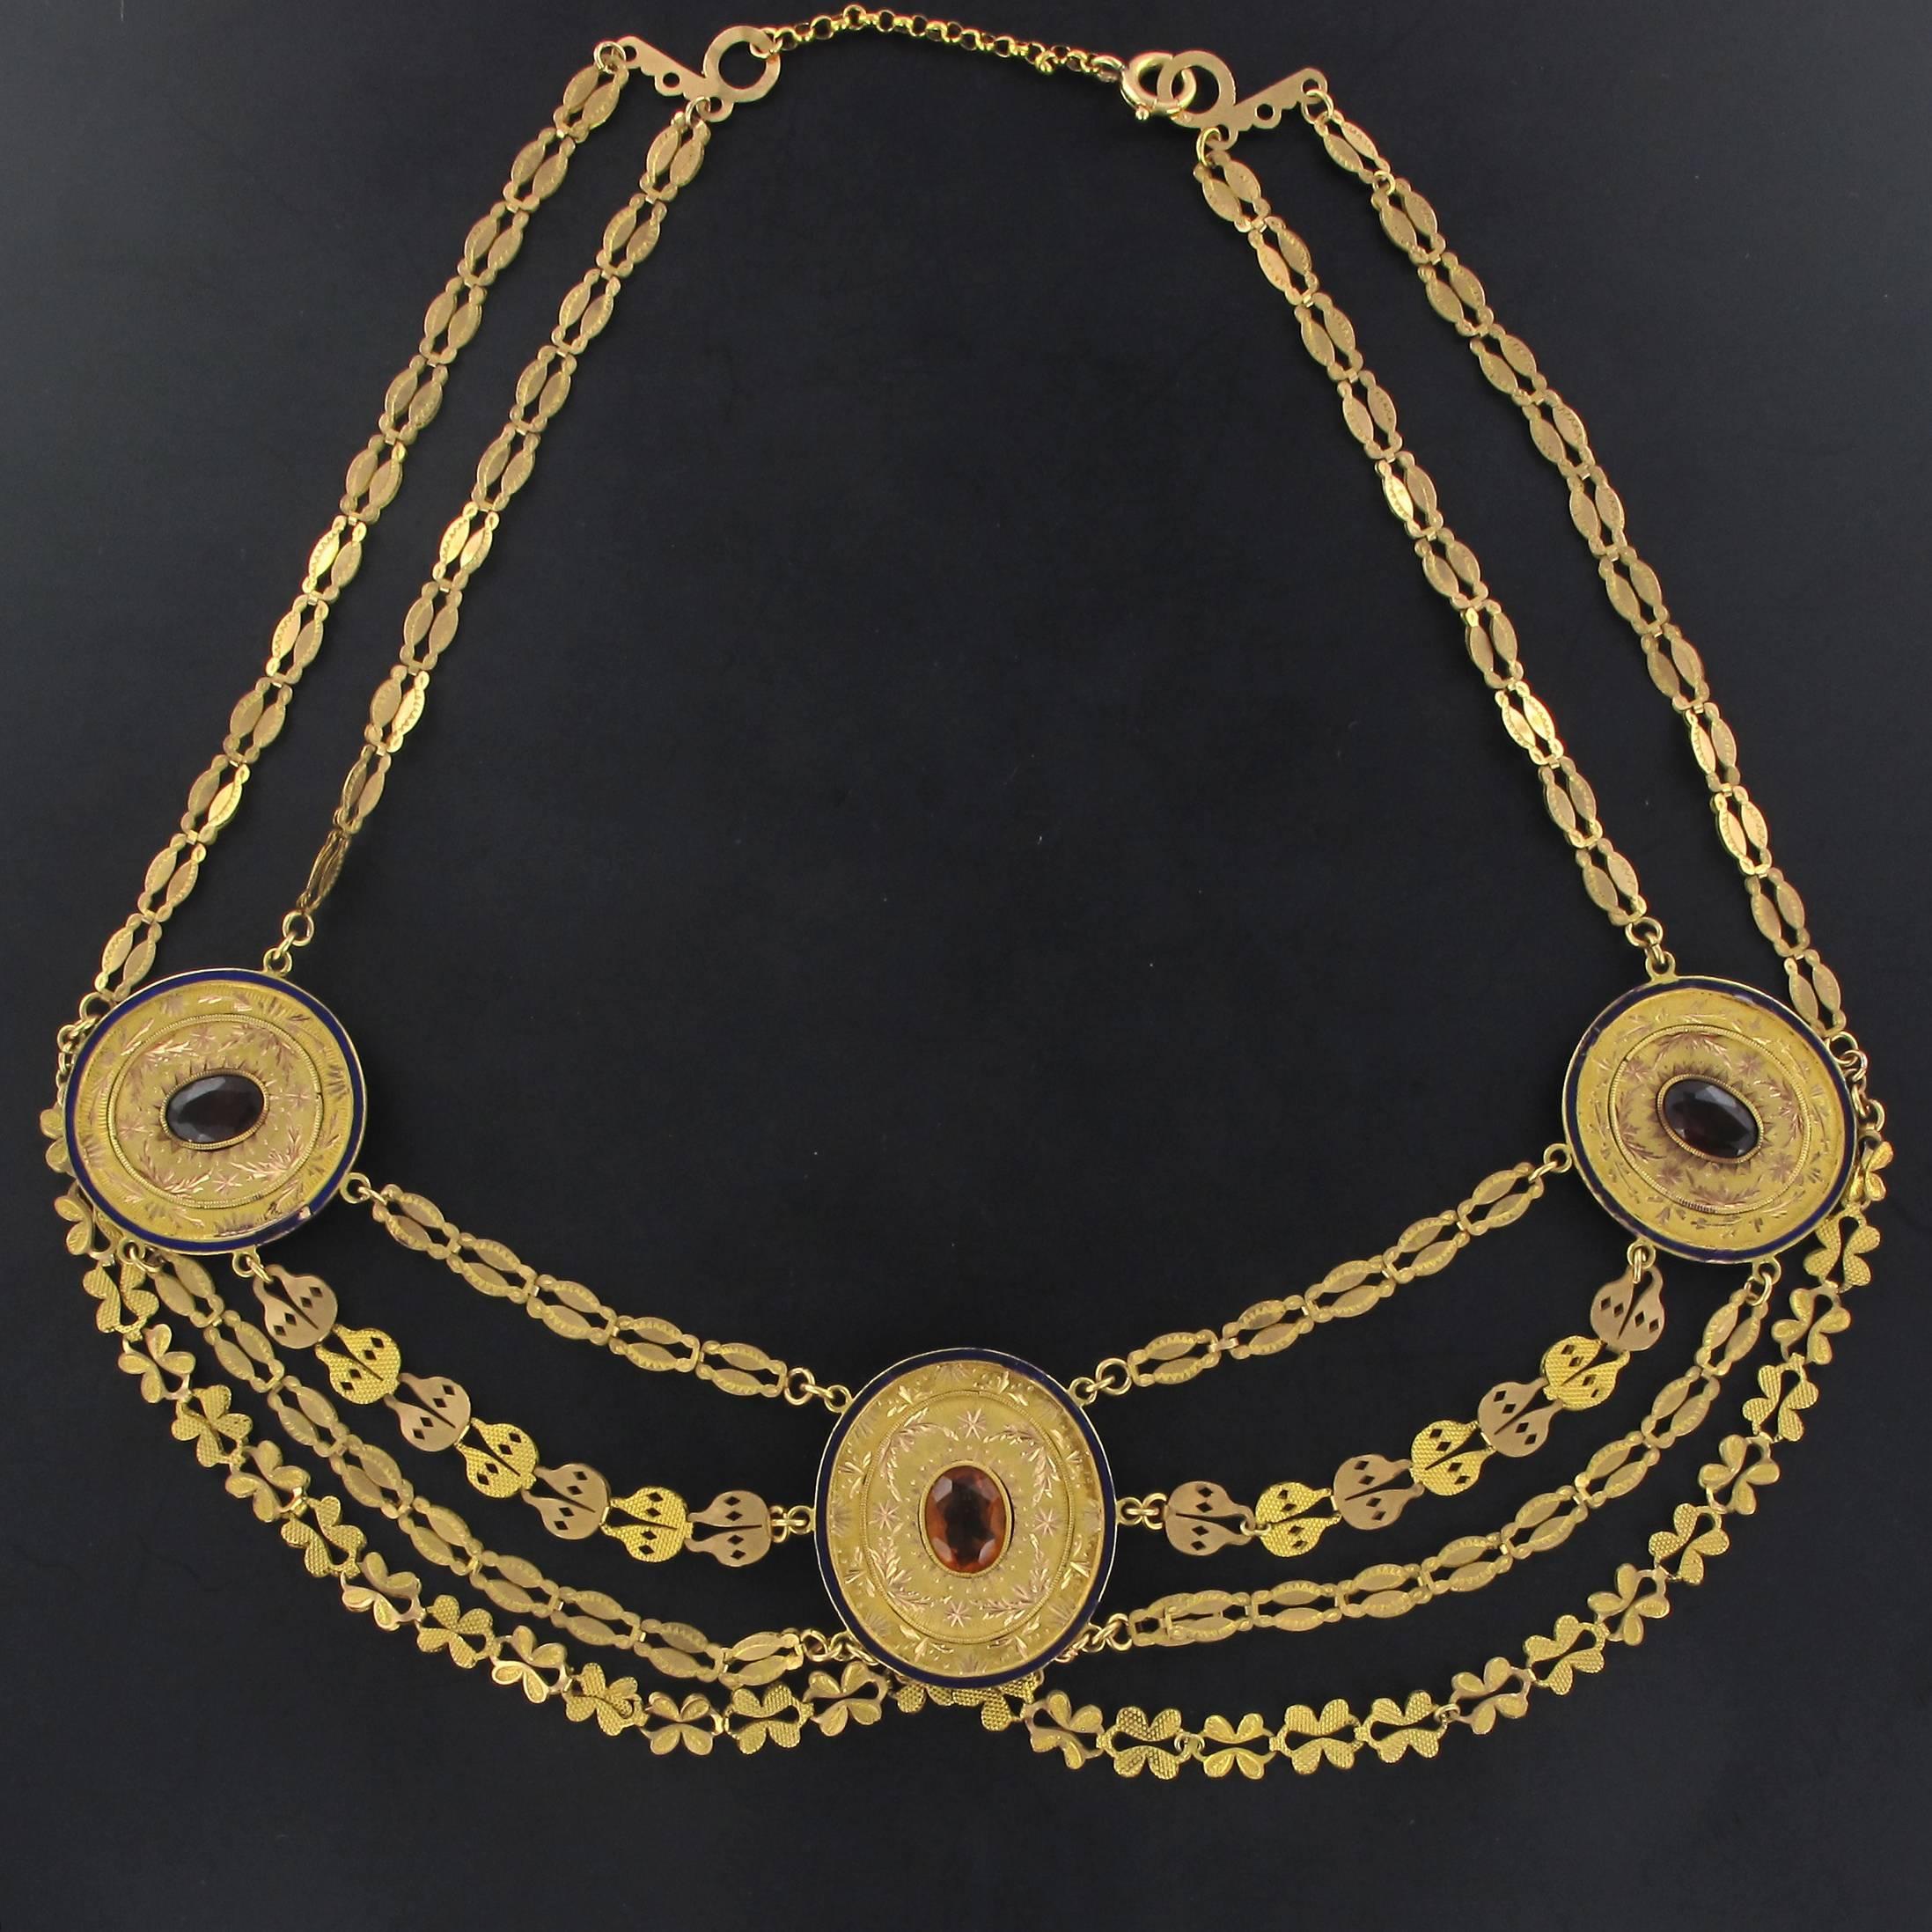 Necklace in 18 karat yellow gold. 
This rare antique golden necklace is composed of three finely engraved oval motifs, each is set with an oval yellow gem edged with a fine royal blue enamel border. These 3 motifs are separated and suspended at the